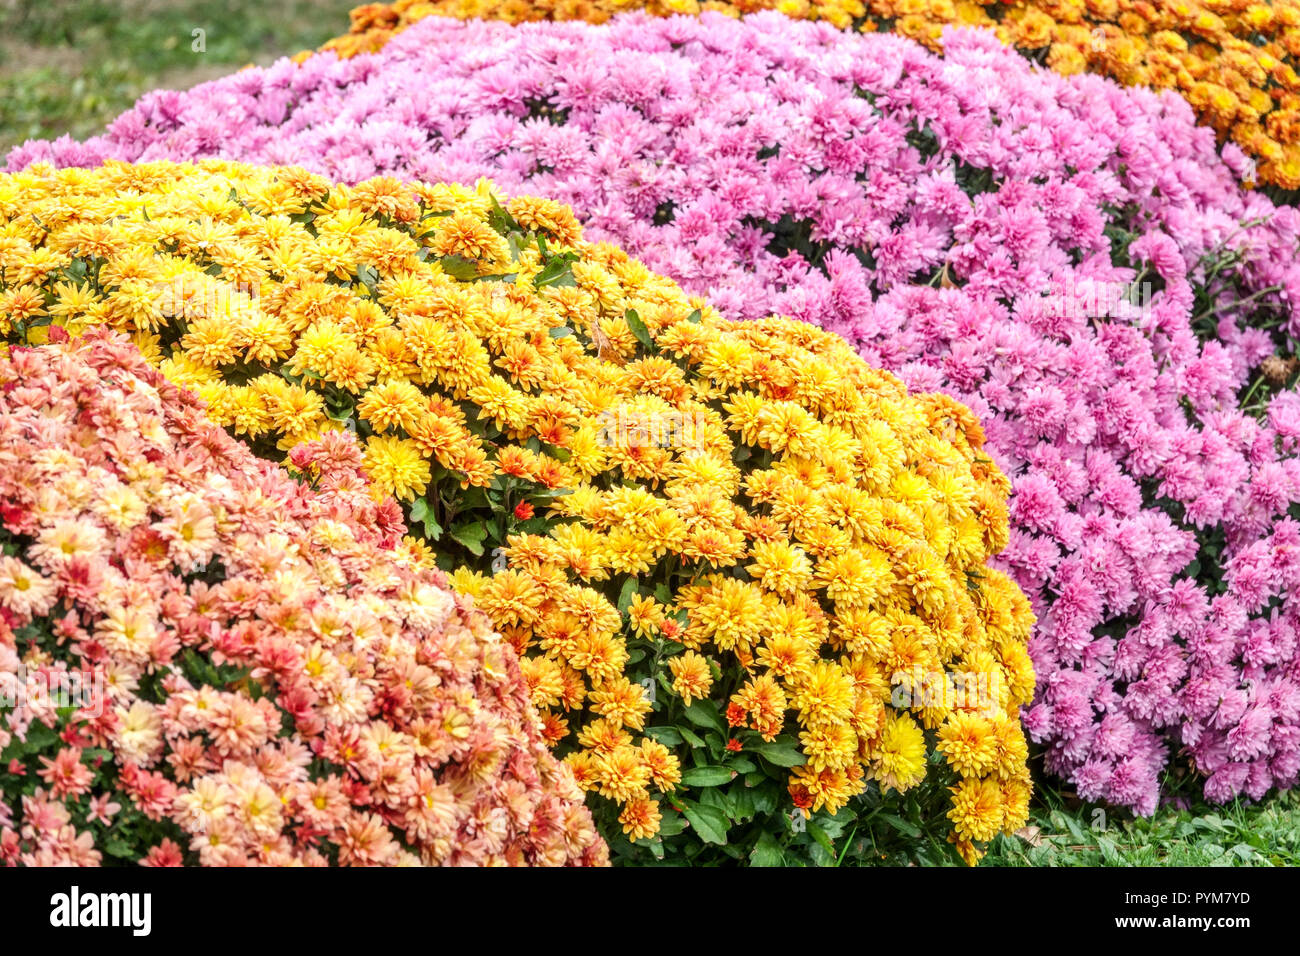 Many flowers color combination Chrysanthemum, Autumn flowers in the garden, contrast and colourful flower bed October garden Stock Photo